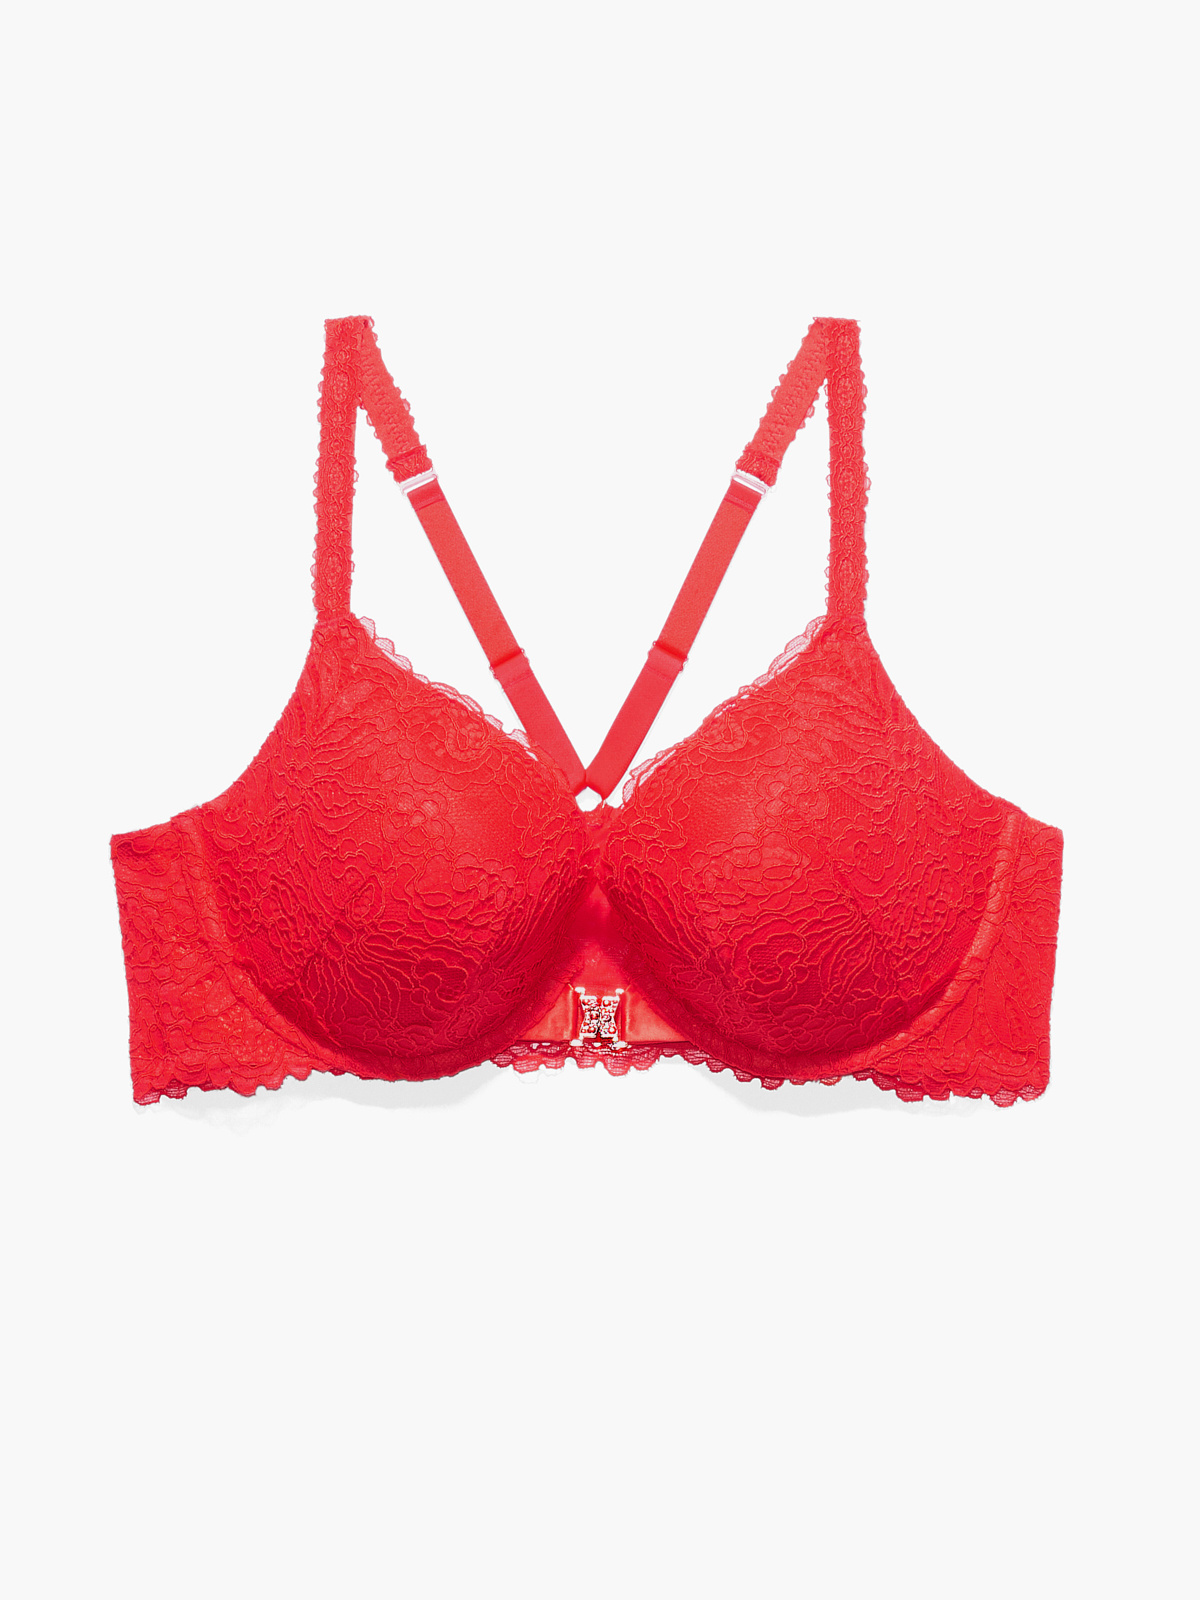 Romantic Corded Lace Push-Up Bra in Red